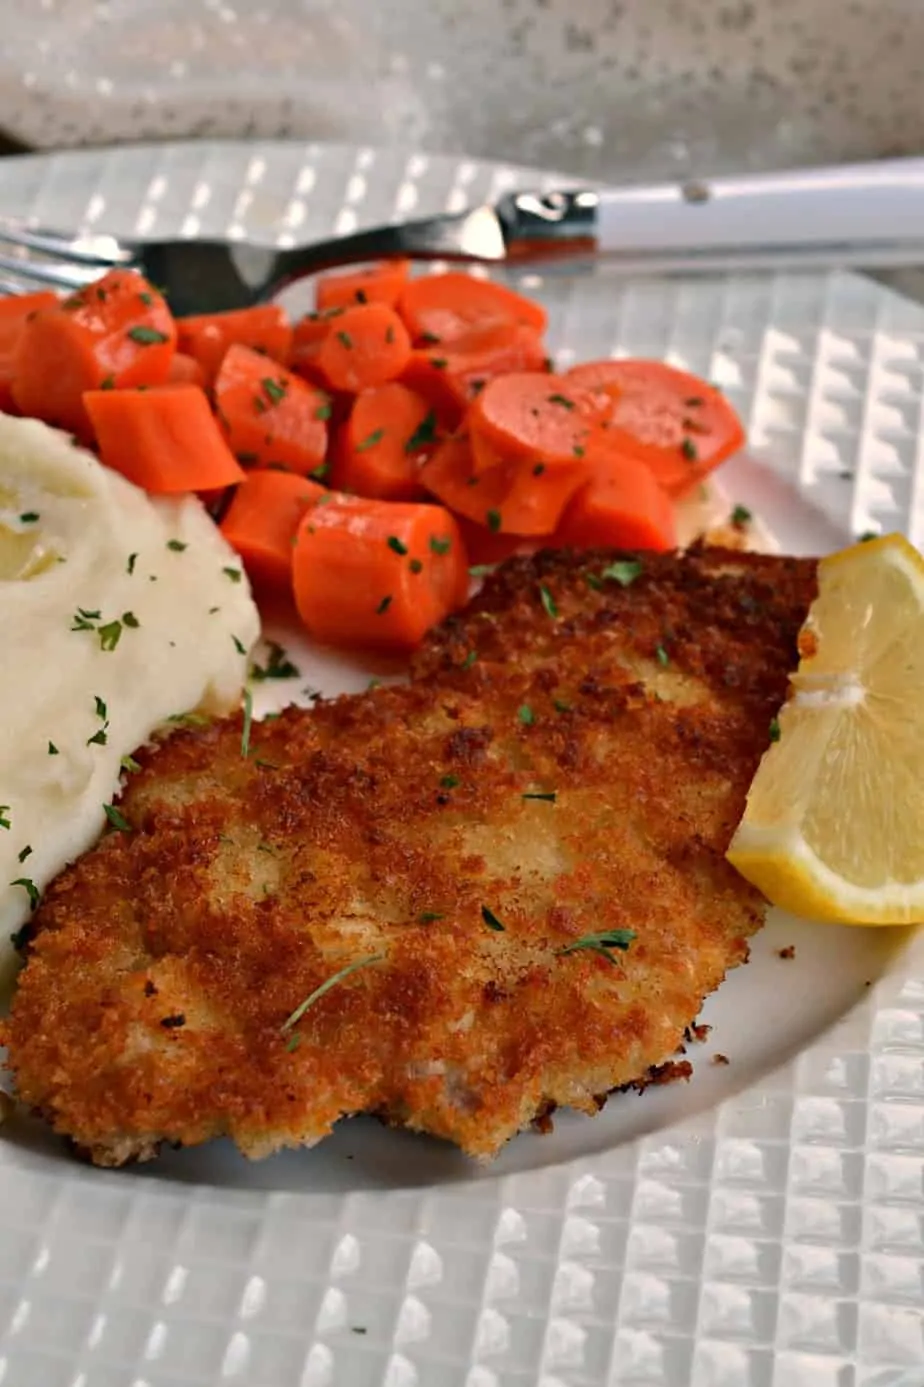 Delicious Pork Schnitzel is quick and easy to make with wholesome pantry ingredients that you may already have on hand.